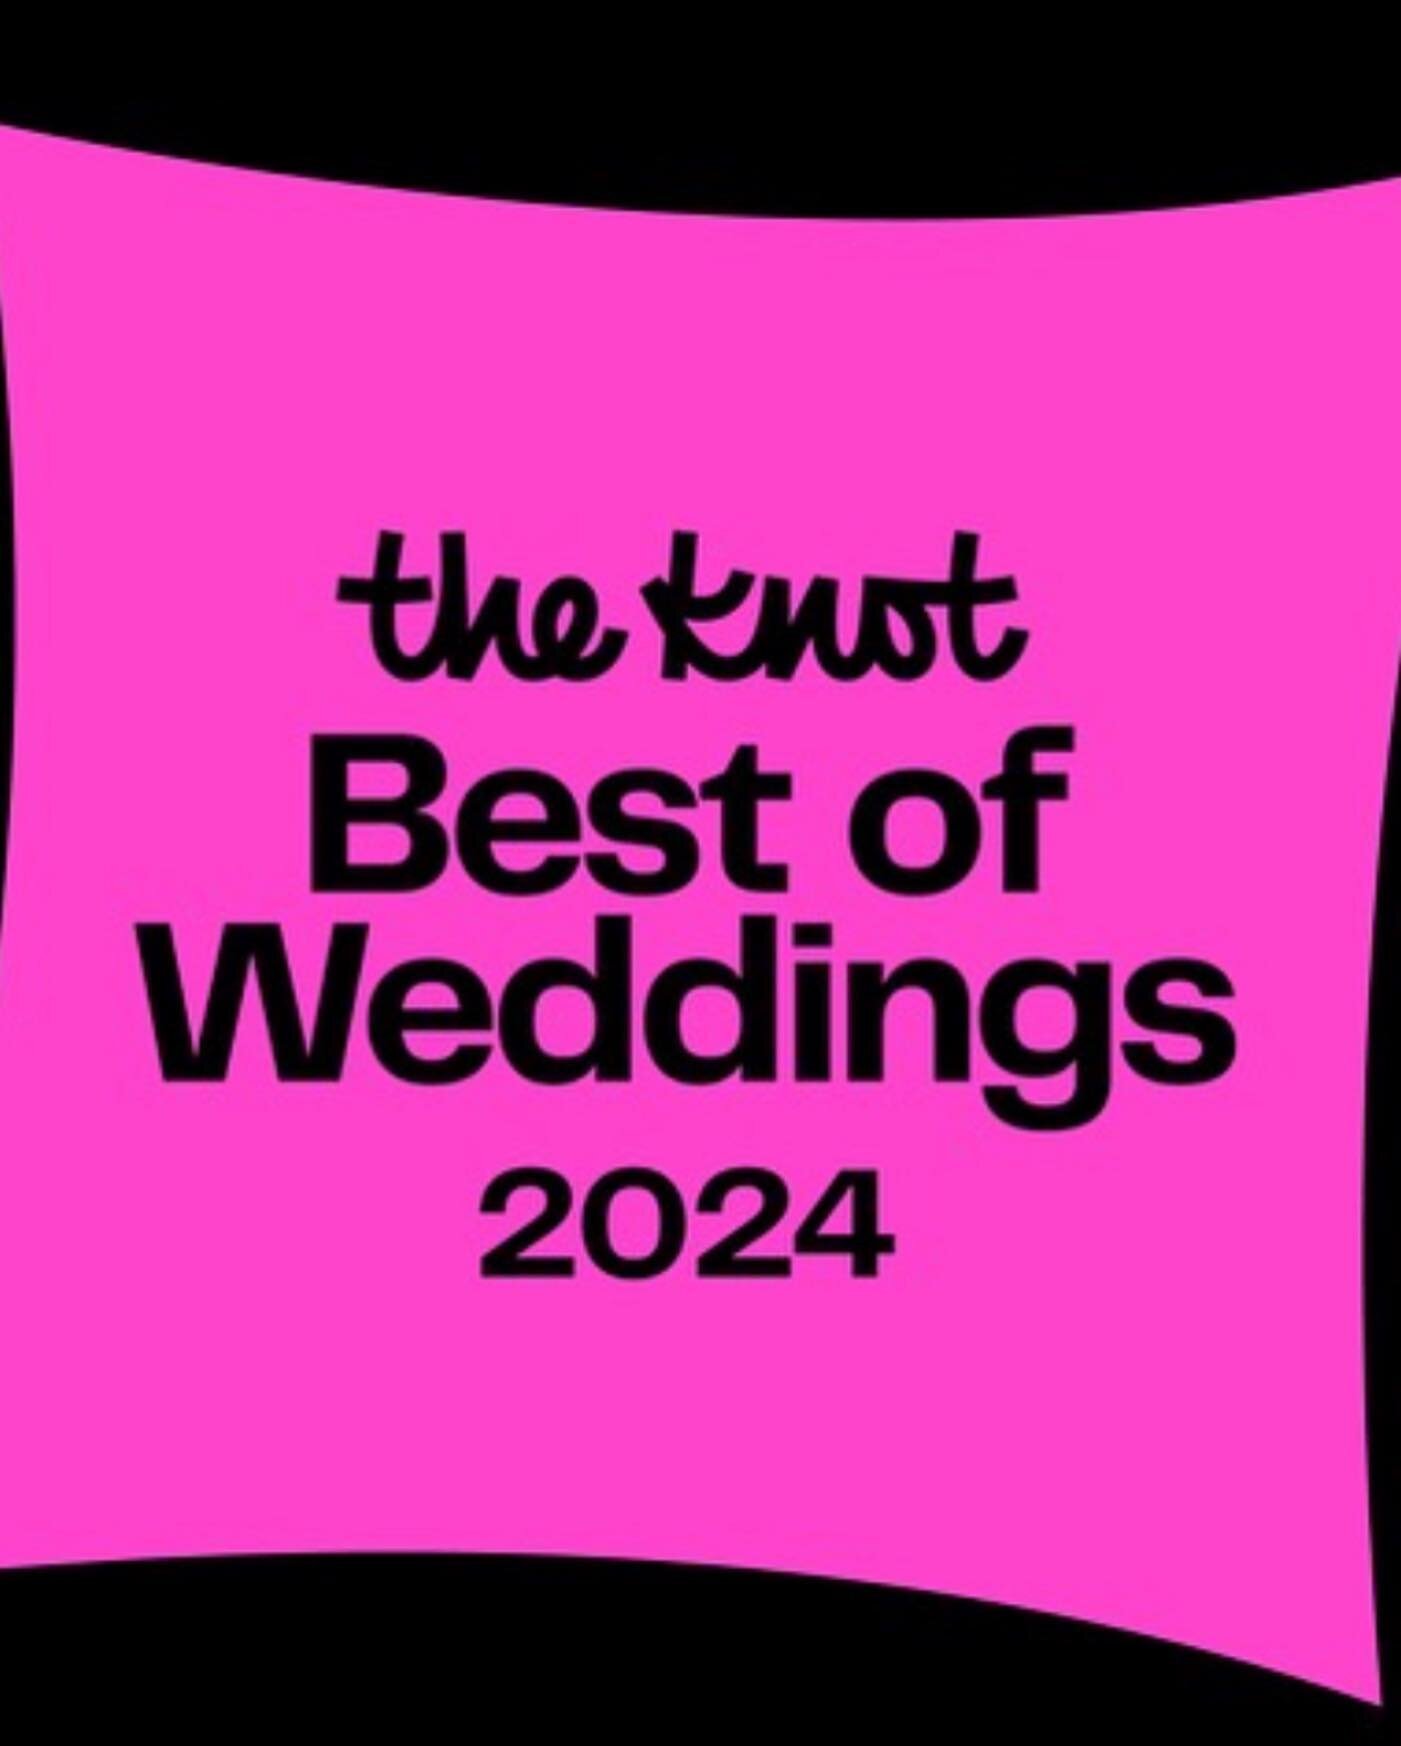 Yesss! First timer starting a business on the KNOT! Thank you thank you for the beautiful brides and couples who made my year. I had the BEST brides 💗💗 Excited for this year to come- please let&rsquo;s connect , now booking for 2024!! Xxx Melissa

